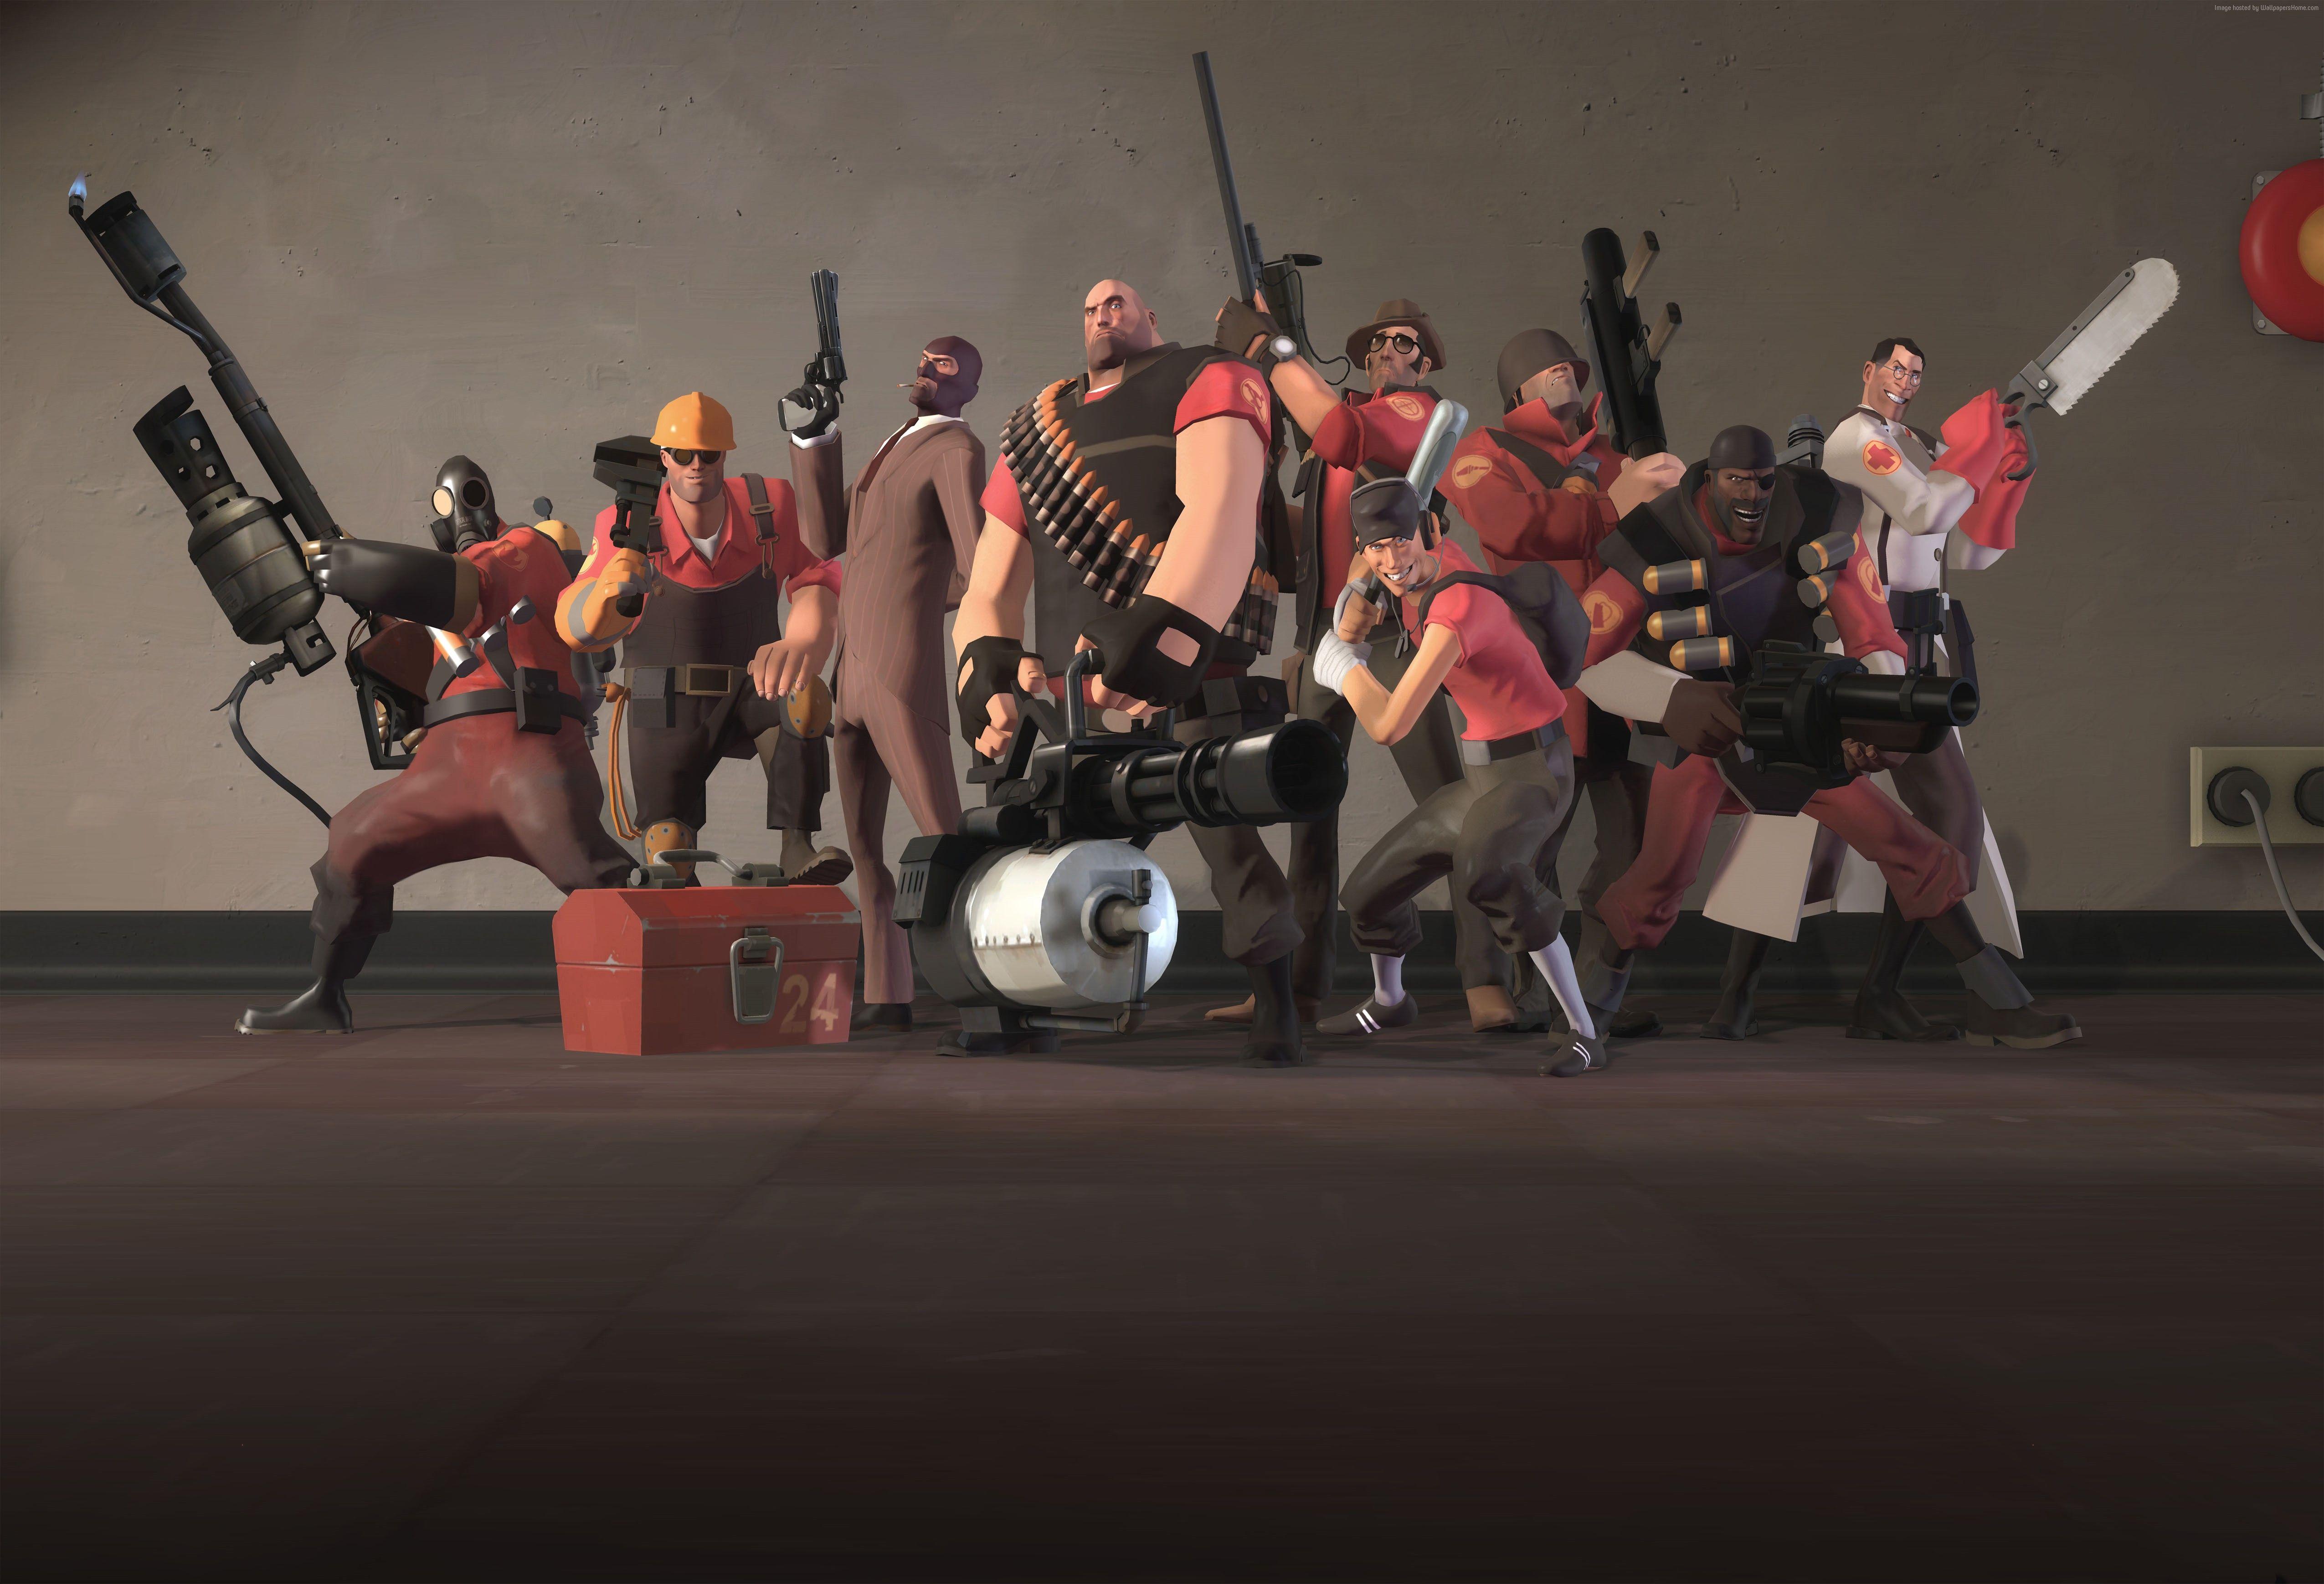 Wallpapers Team Fortress 2, TF2, FPS, all characters, screnshot, 4k